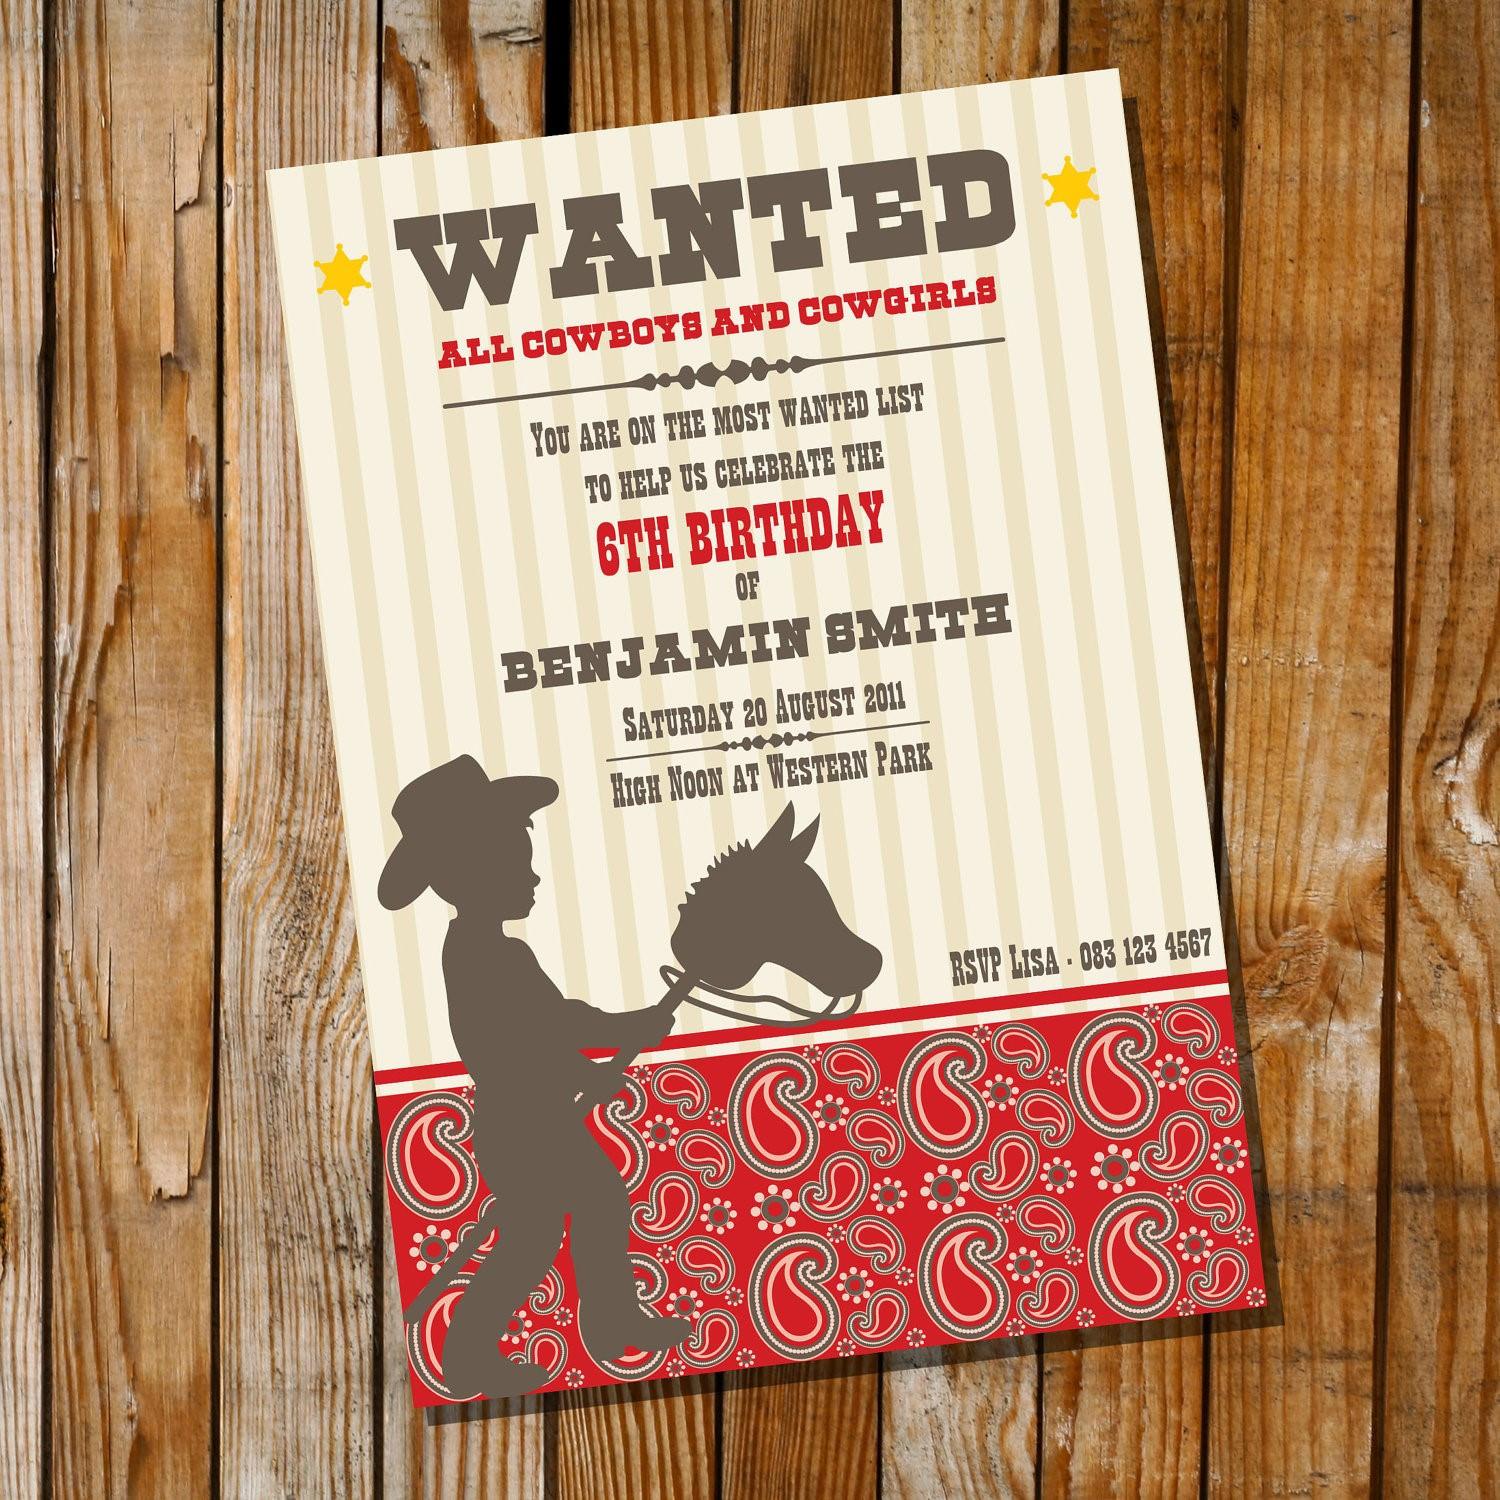 New Cowboy Party Invitations To Create Your Own Party Invitation